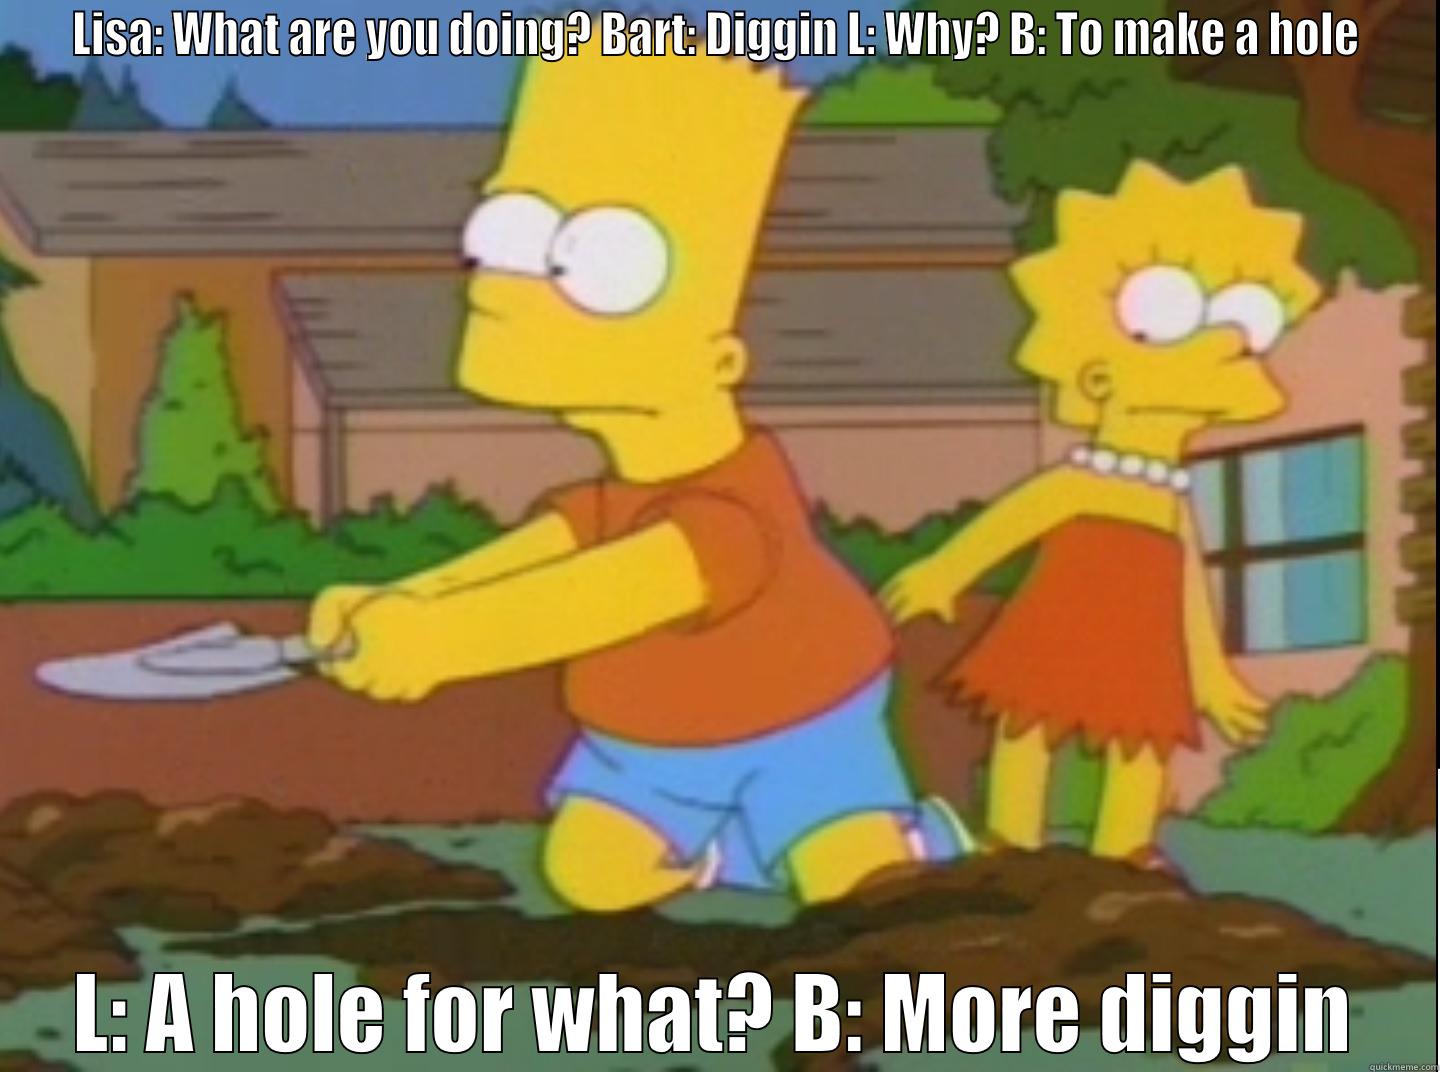 One of the least explained scenes ever - LISA: WHAT ARE YOU DOING? BART: DIGGIN L: WHY? B: TO MAKE A HOLE L: A HOLE FOR WHAT? B: MORE DIGGIN Misc